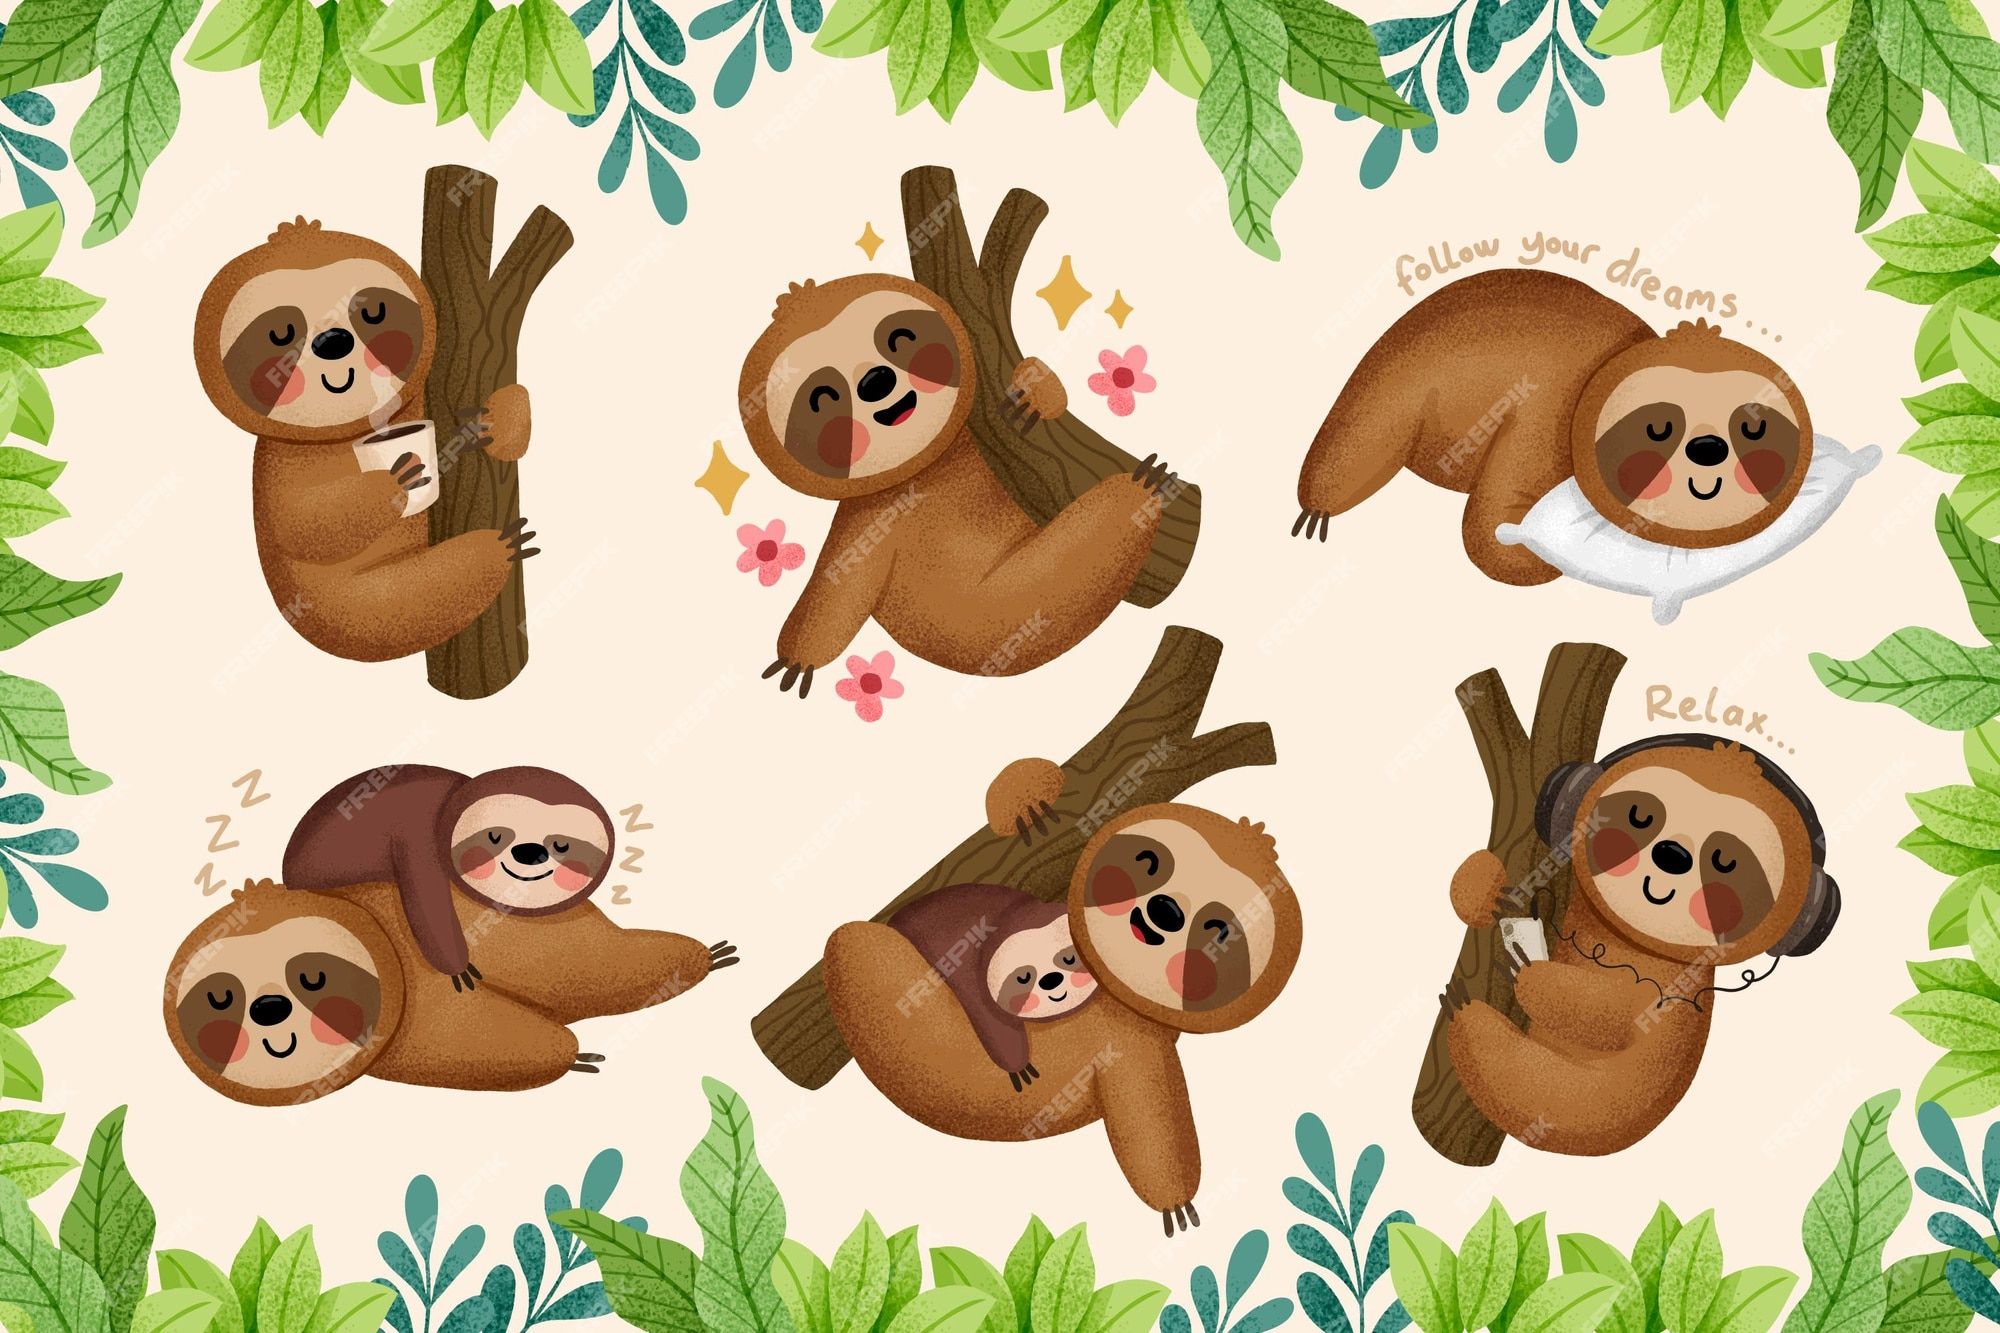 Cute sloth illustration set. Sloth hanging on a tree branch, sleeping, eating, relaxing. - Sloth